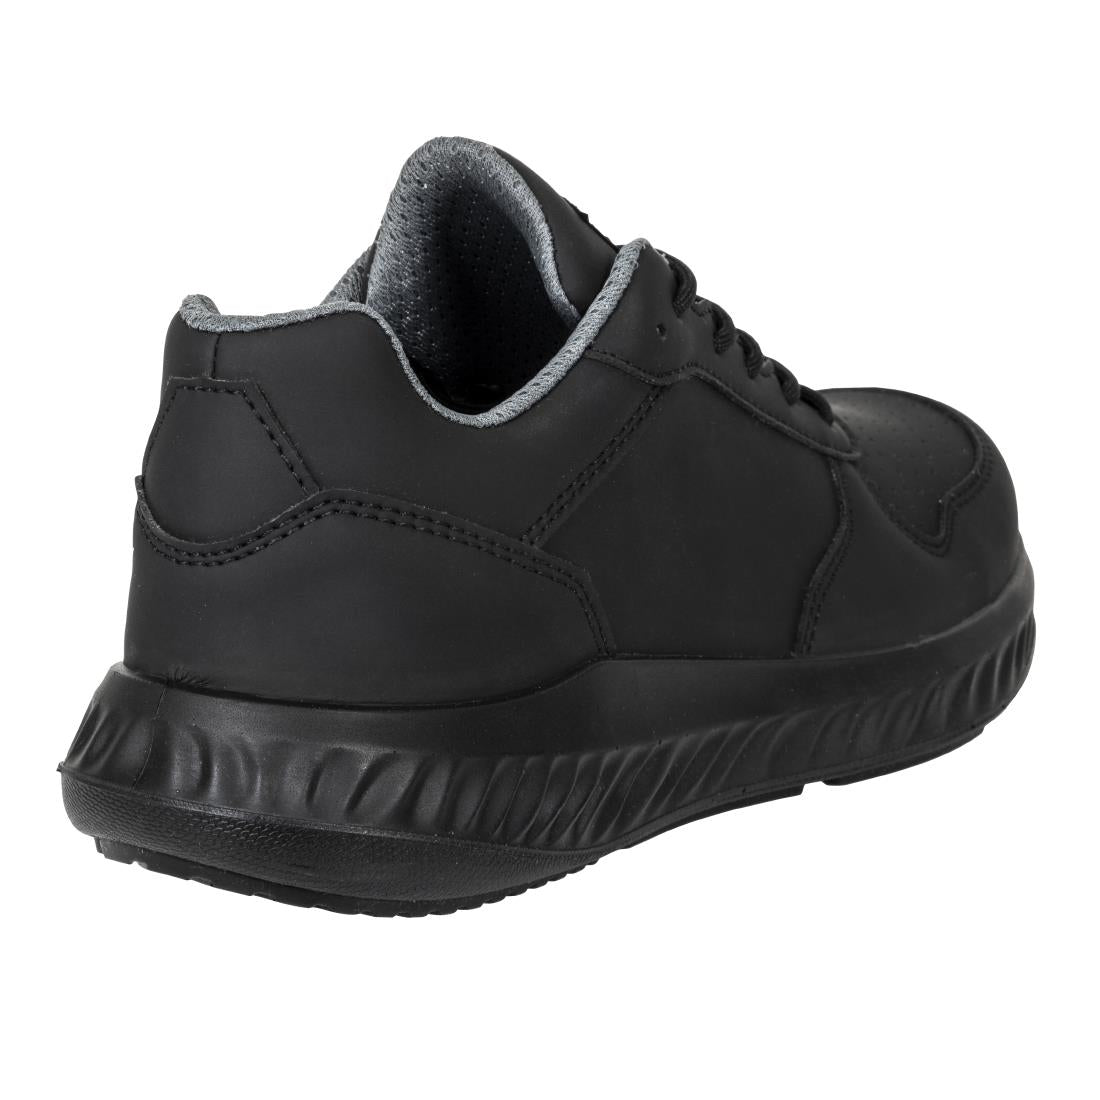 BA063-40 Slipbuster Recycled Microfibre Trainers Matte Black 40 JD Catering Equipment Solutions Ltd